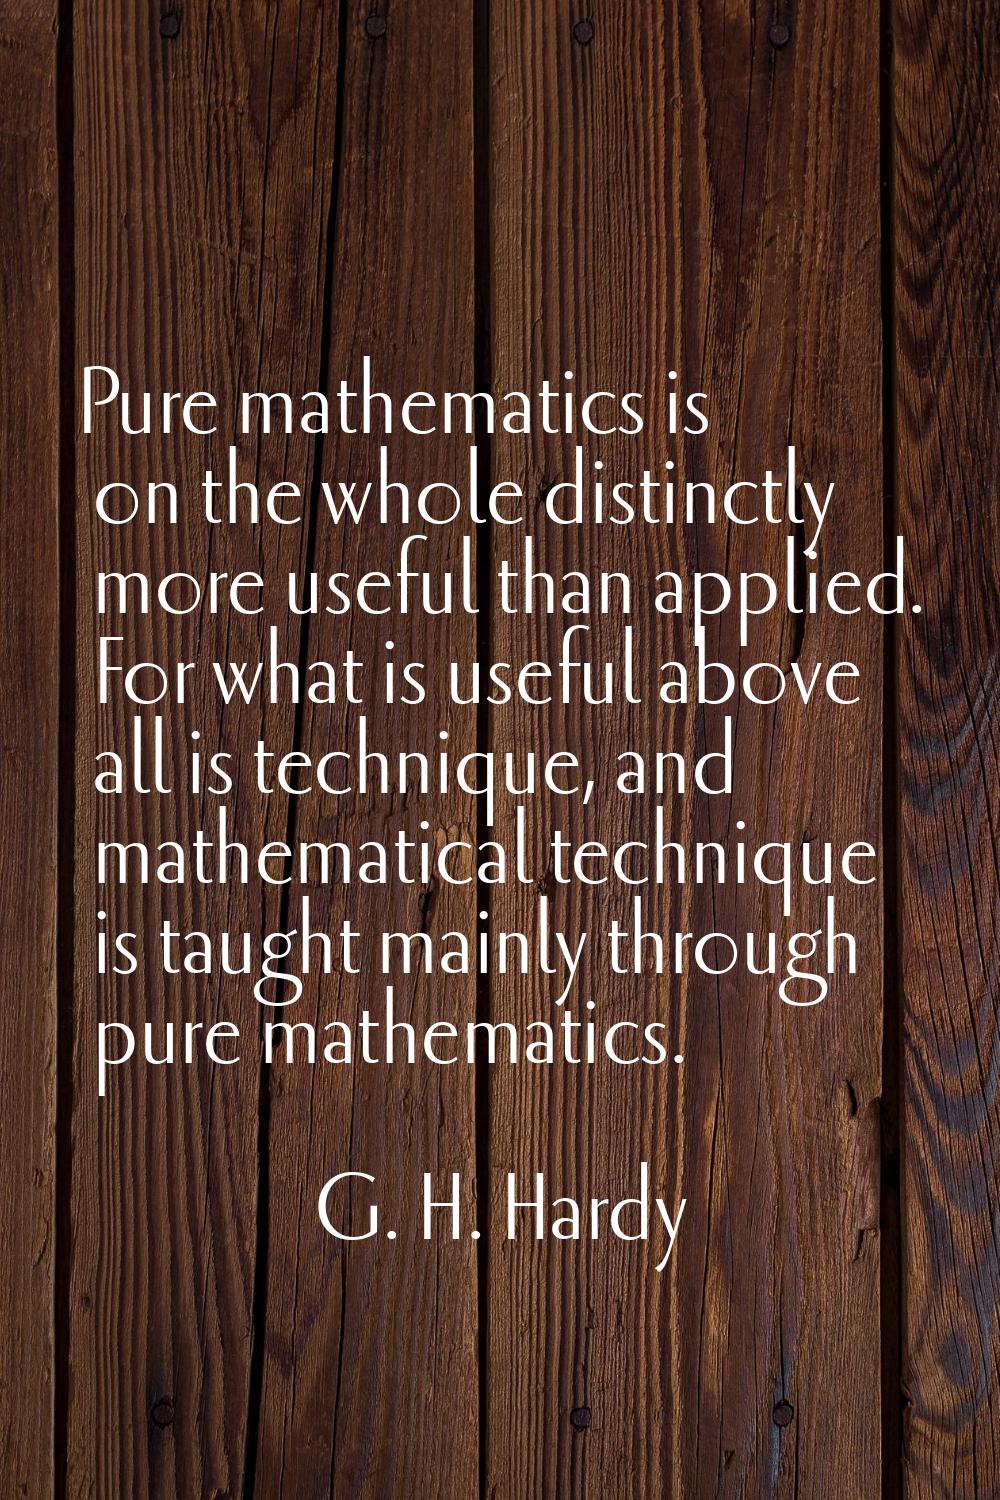 Pure mathematics is on the whole distinctly more useful than applied. For what is useful above all 